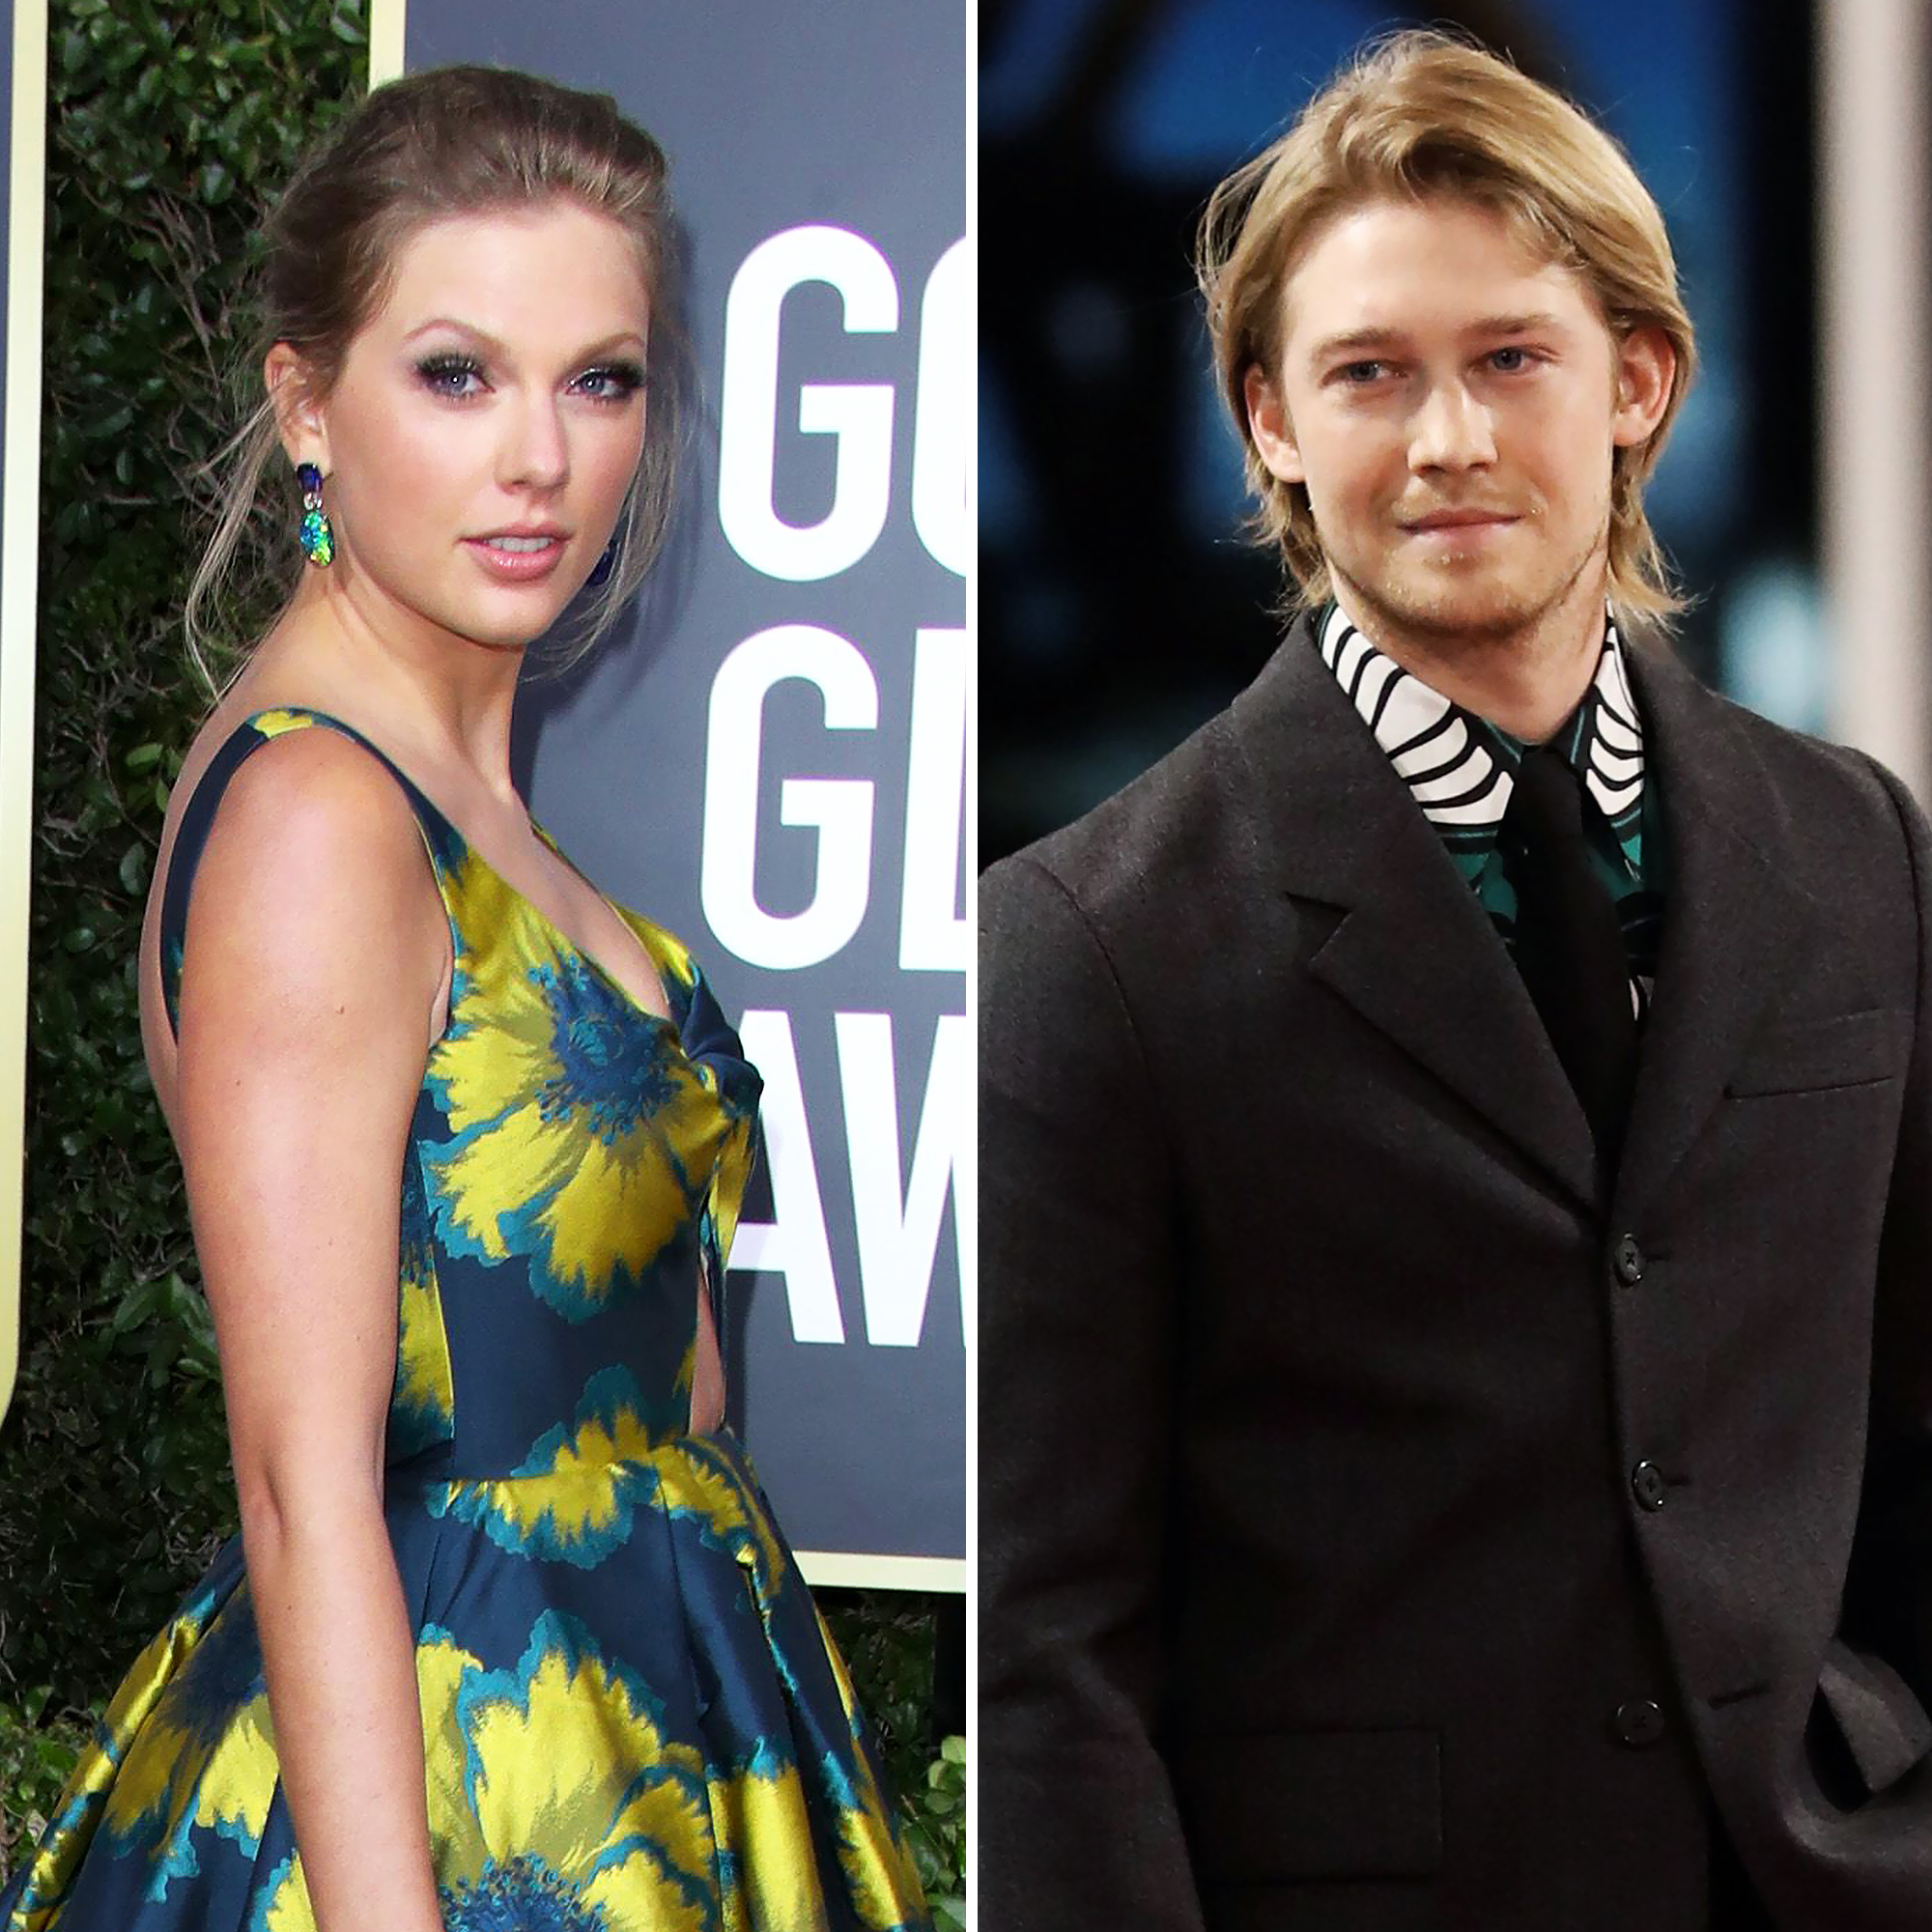 Taylor Swift Tried to Create 'Normalcy' in Relationship With Joe Alwyn